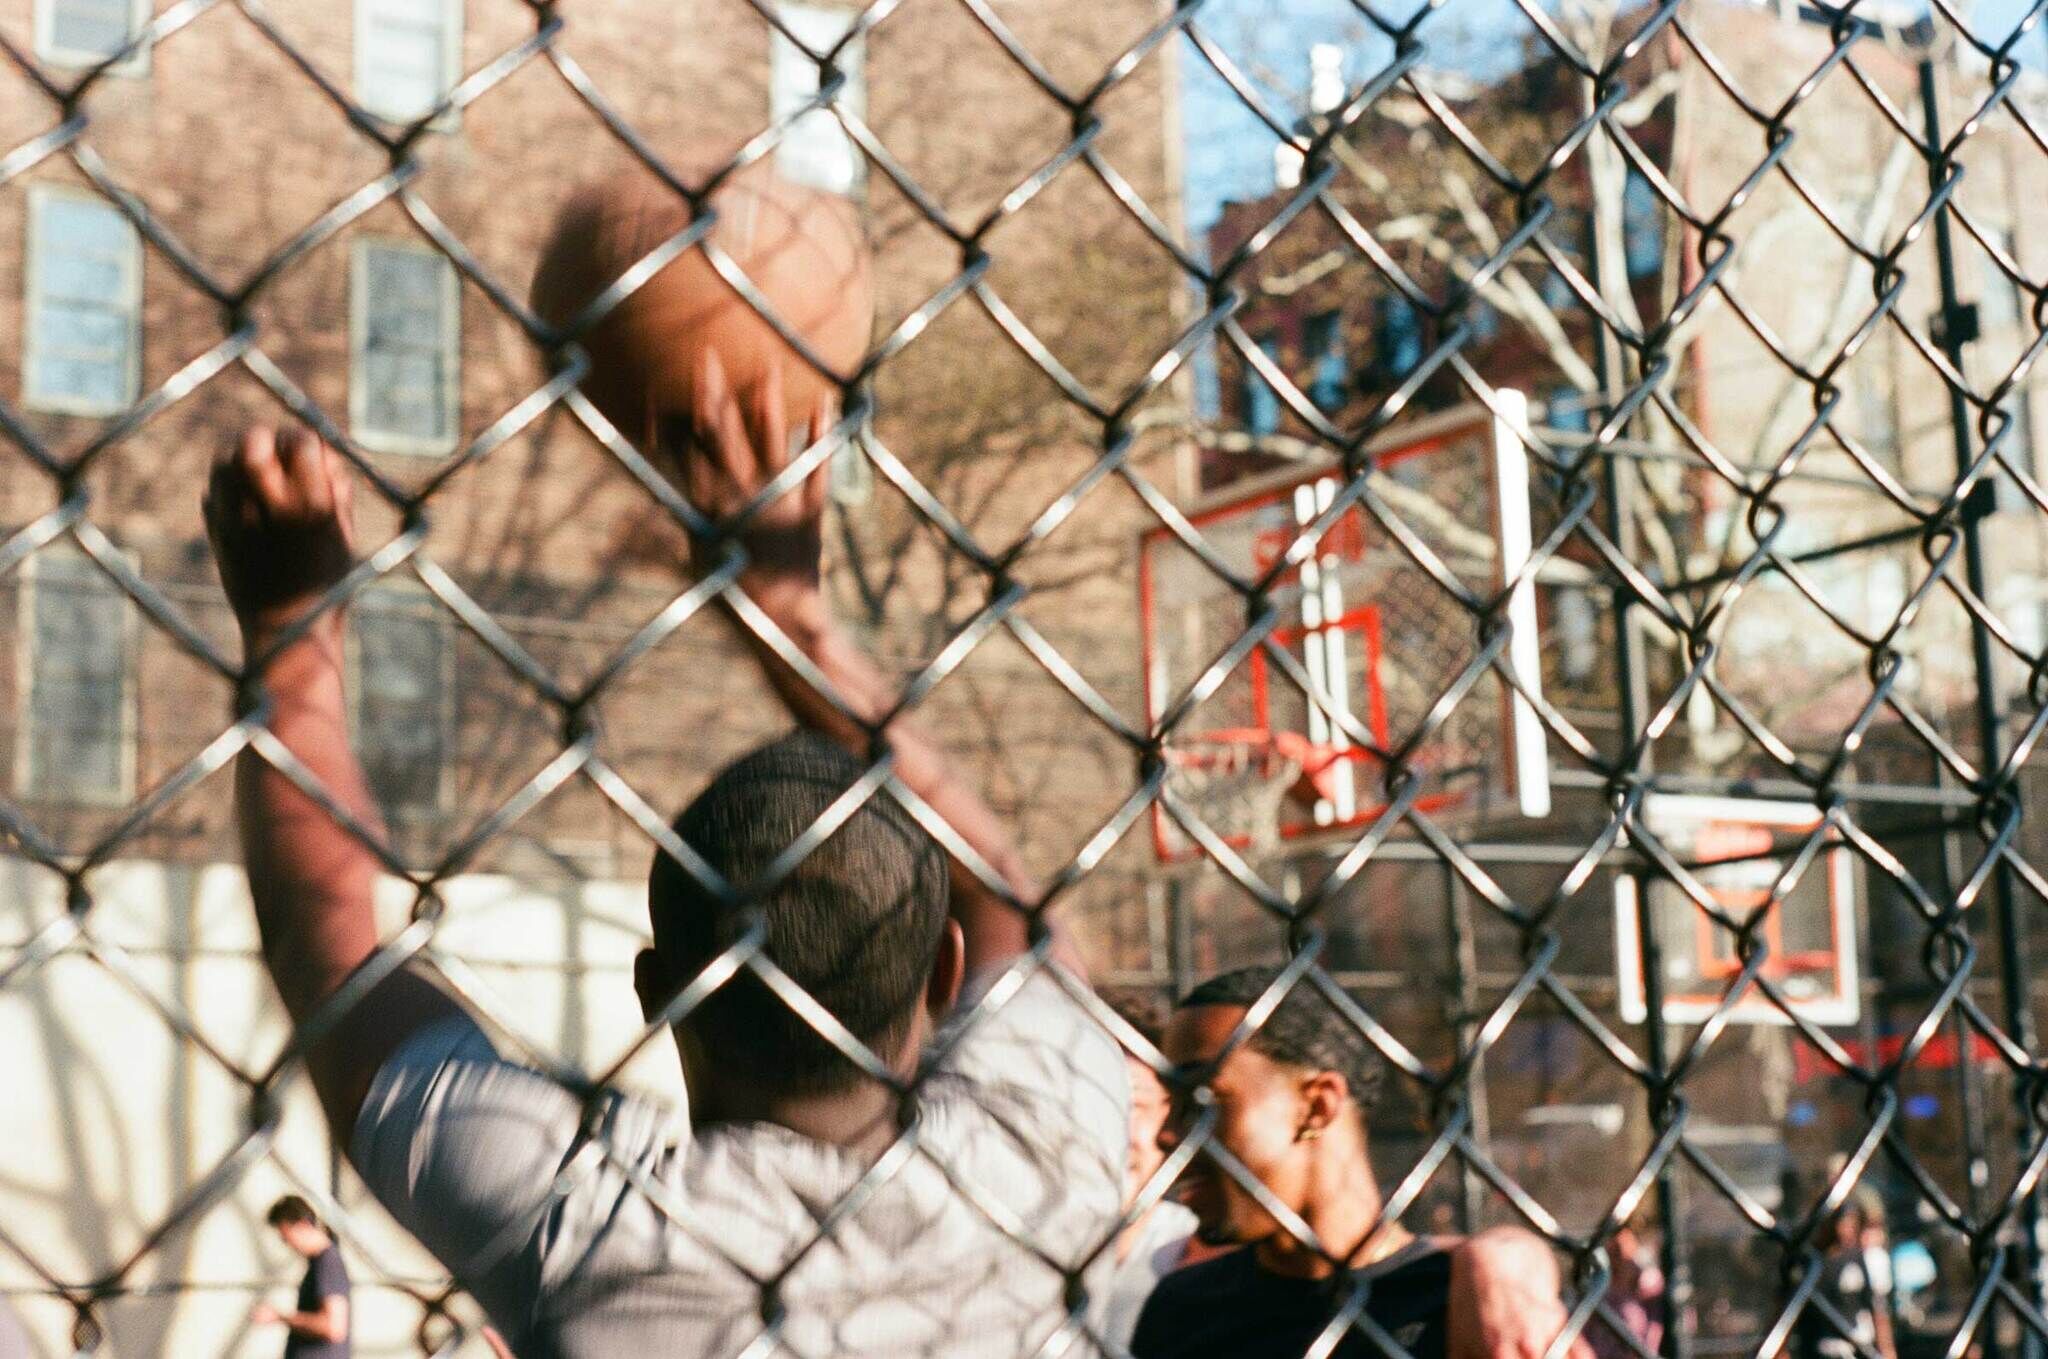 Two people playing basketball on an outdoor court, viewed through a chain-link fence. One person is shooting the ball towards the hoop.